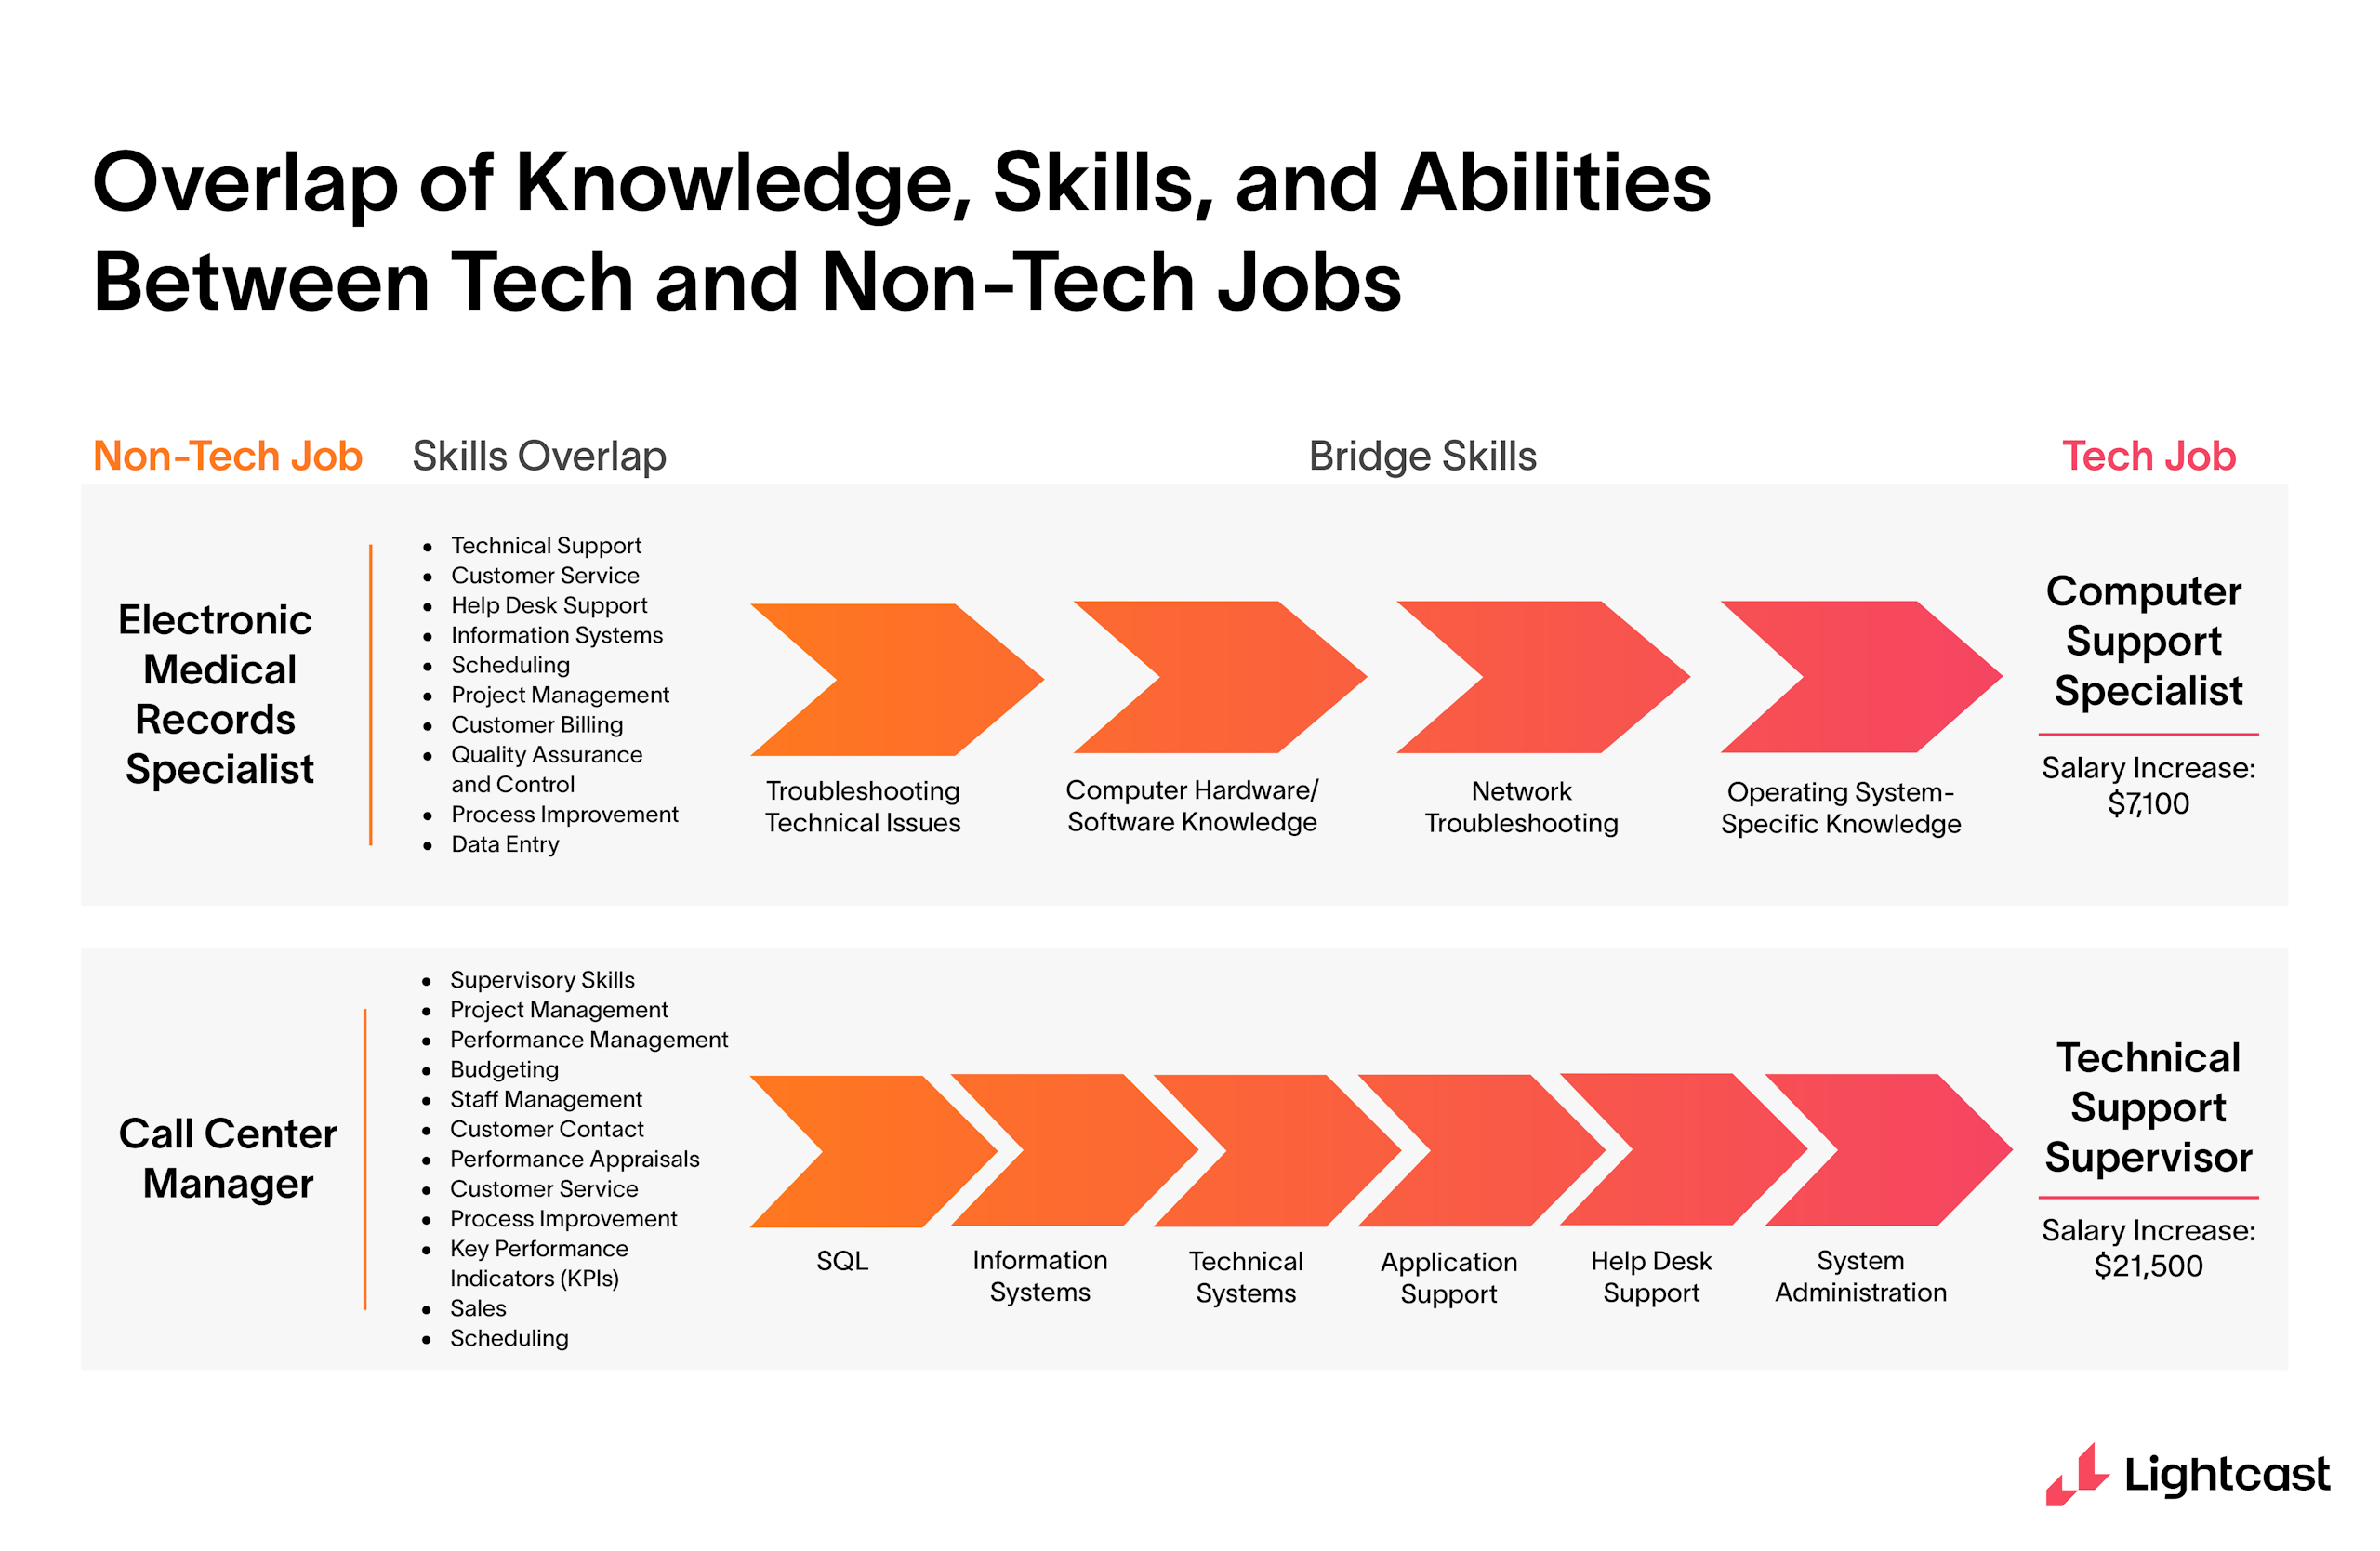 Overlap of knowledge, skills, and abilities between tech and non-tech jobs, using the example of electronic medical records specialist/computer support specialist (salary increase of $7,100) and call center manager/technical support supervisor (salary increase of $21,500)